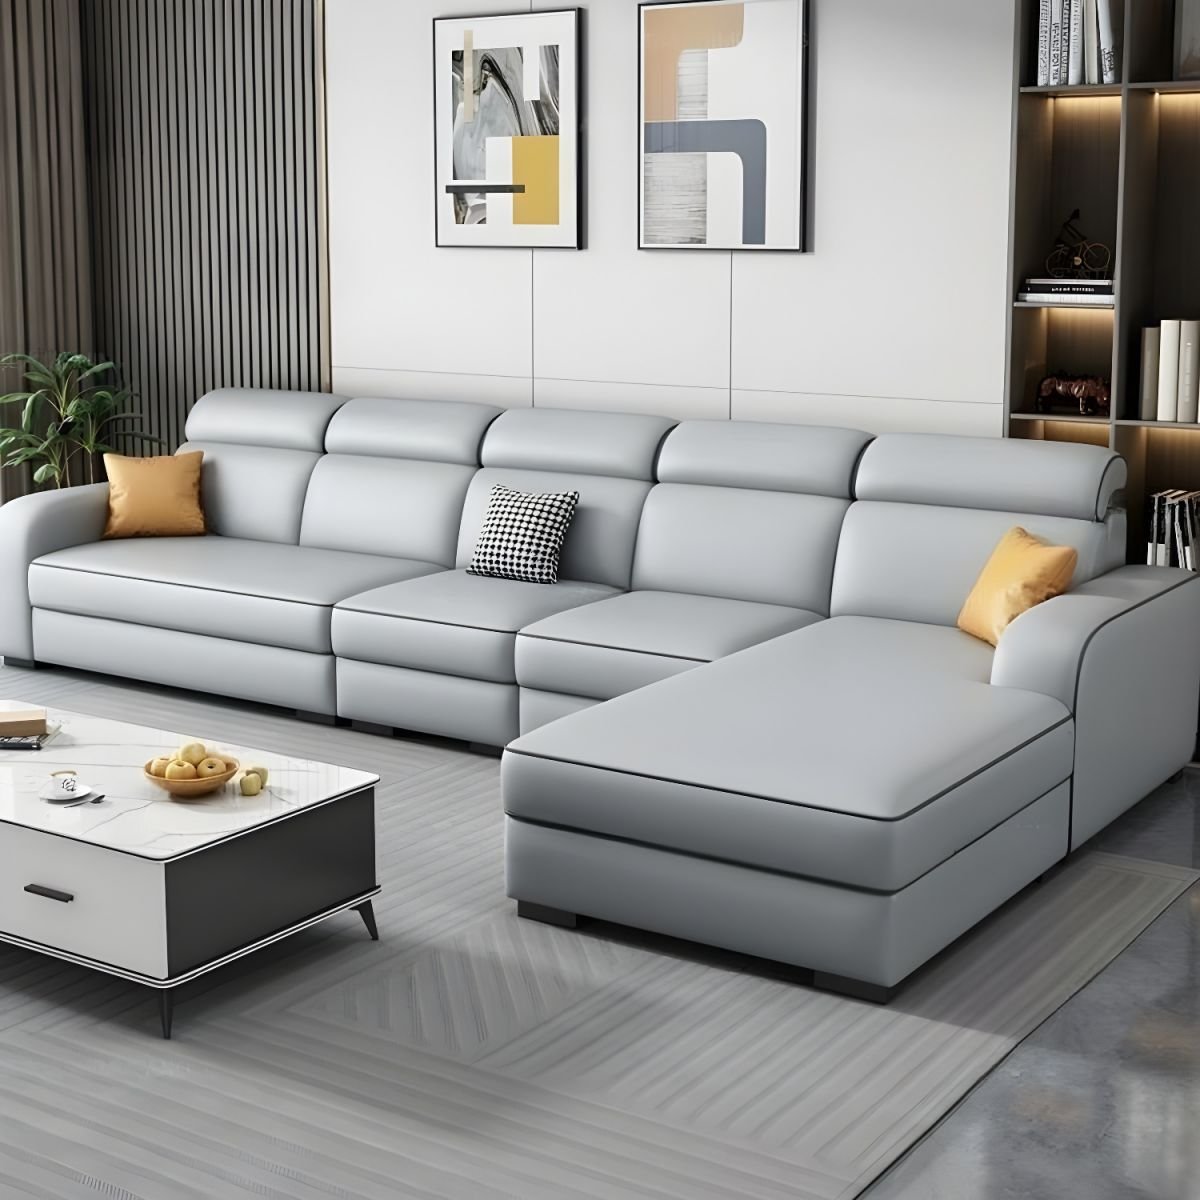 Contemporary Sectional Sofa with Adjustable Pillow and Scratch Resistant Upholstery - Anti Cat Scratch Leather 132"L x 63"W x 31"H Light Gray